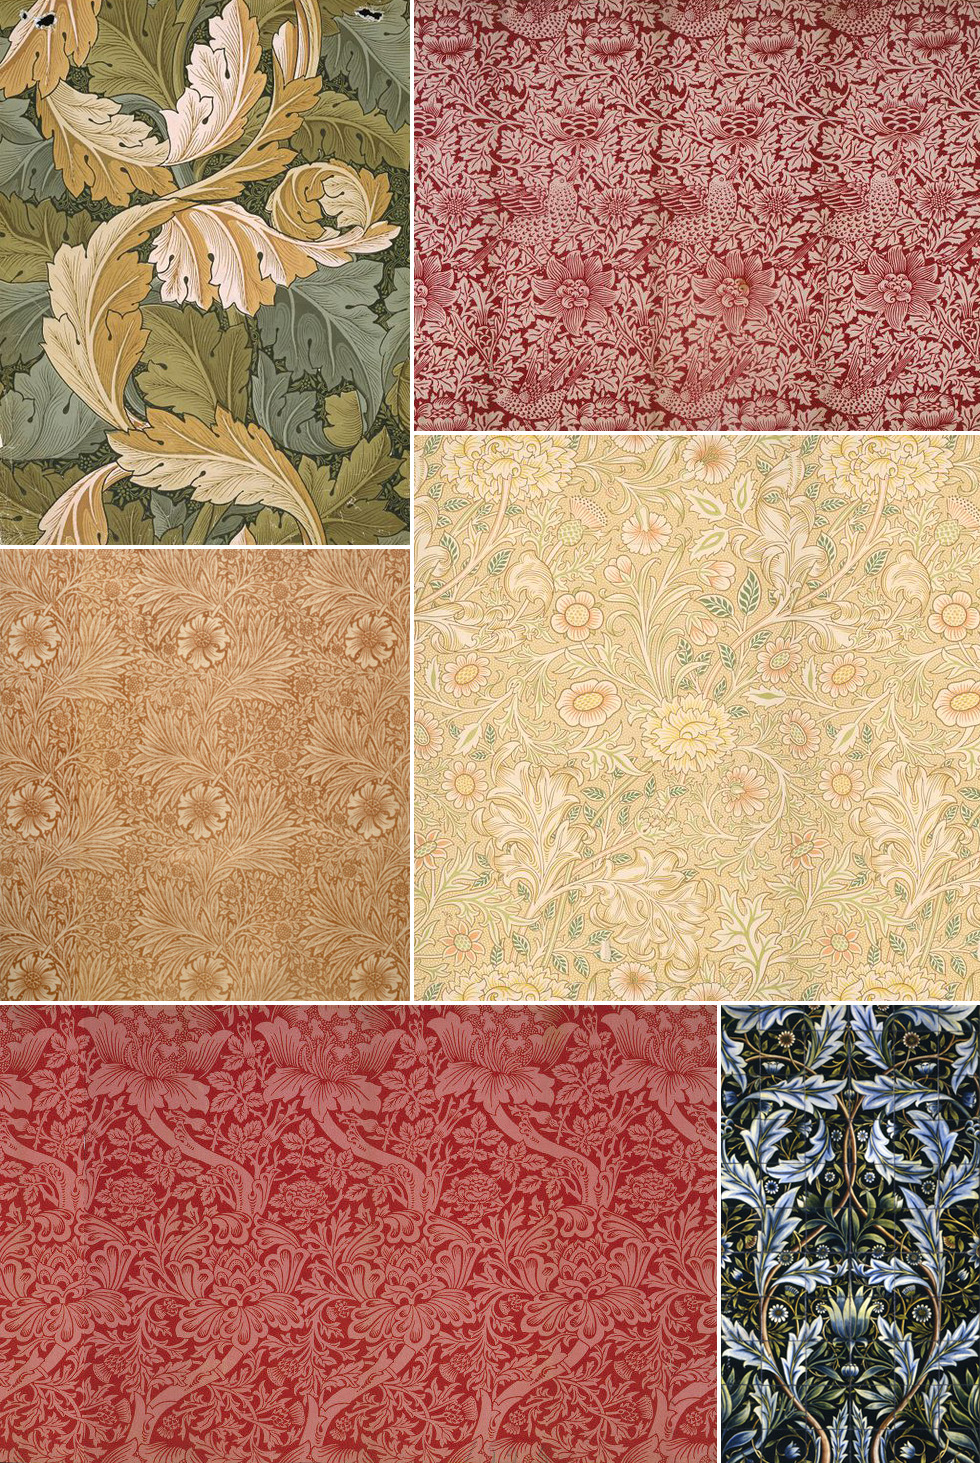 William Morris Embroidery Patterns History Of Surface Design William Morris Pattern Observer